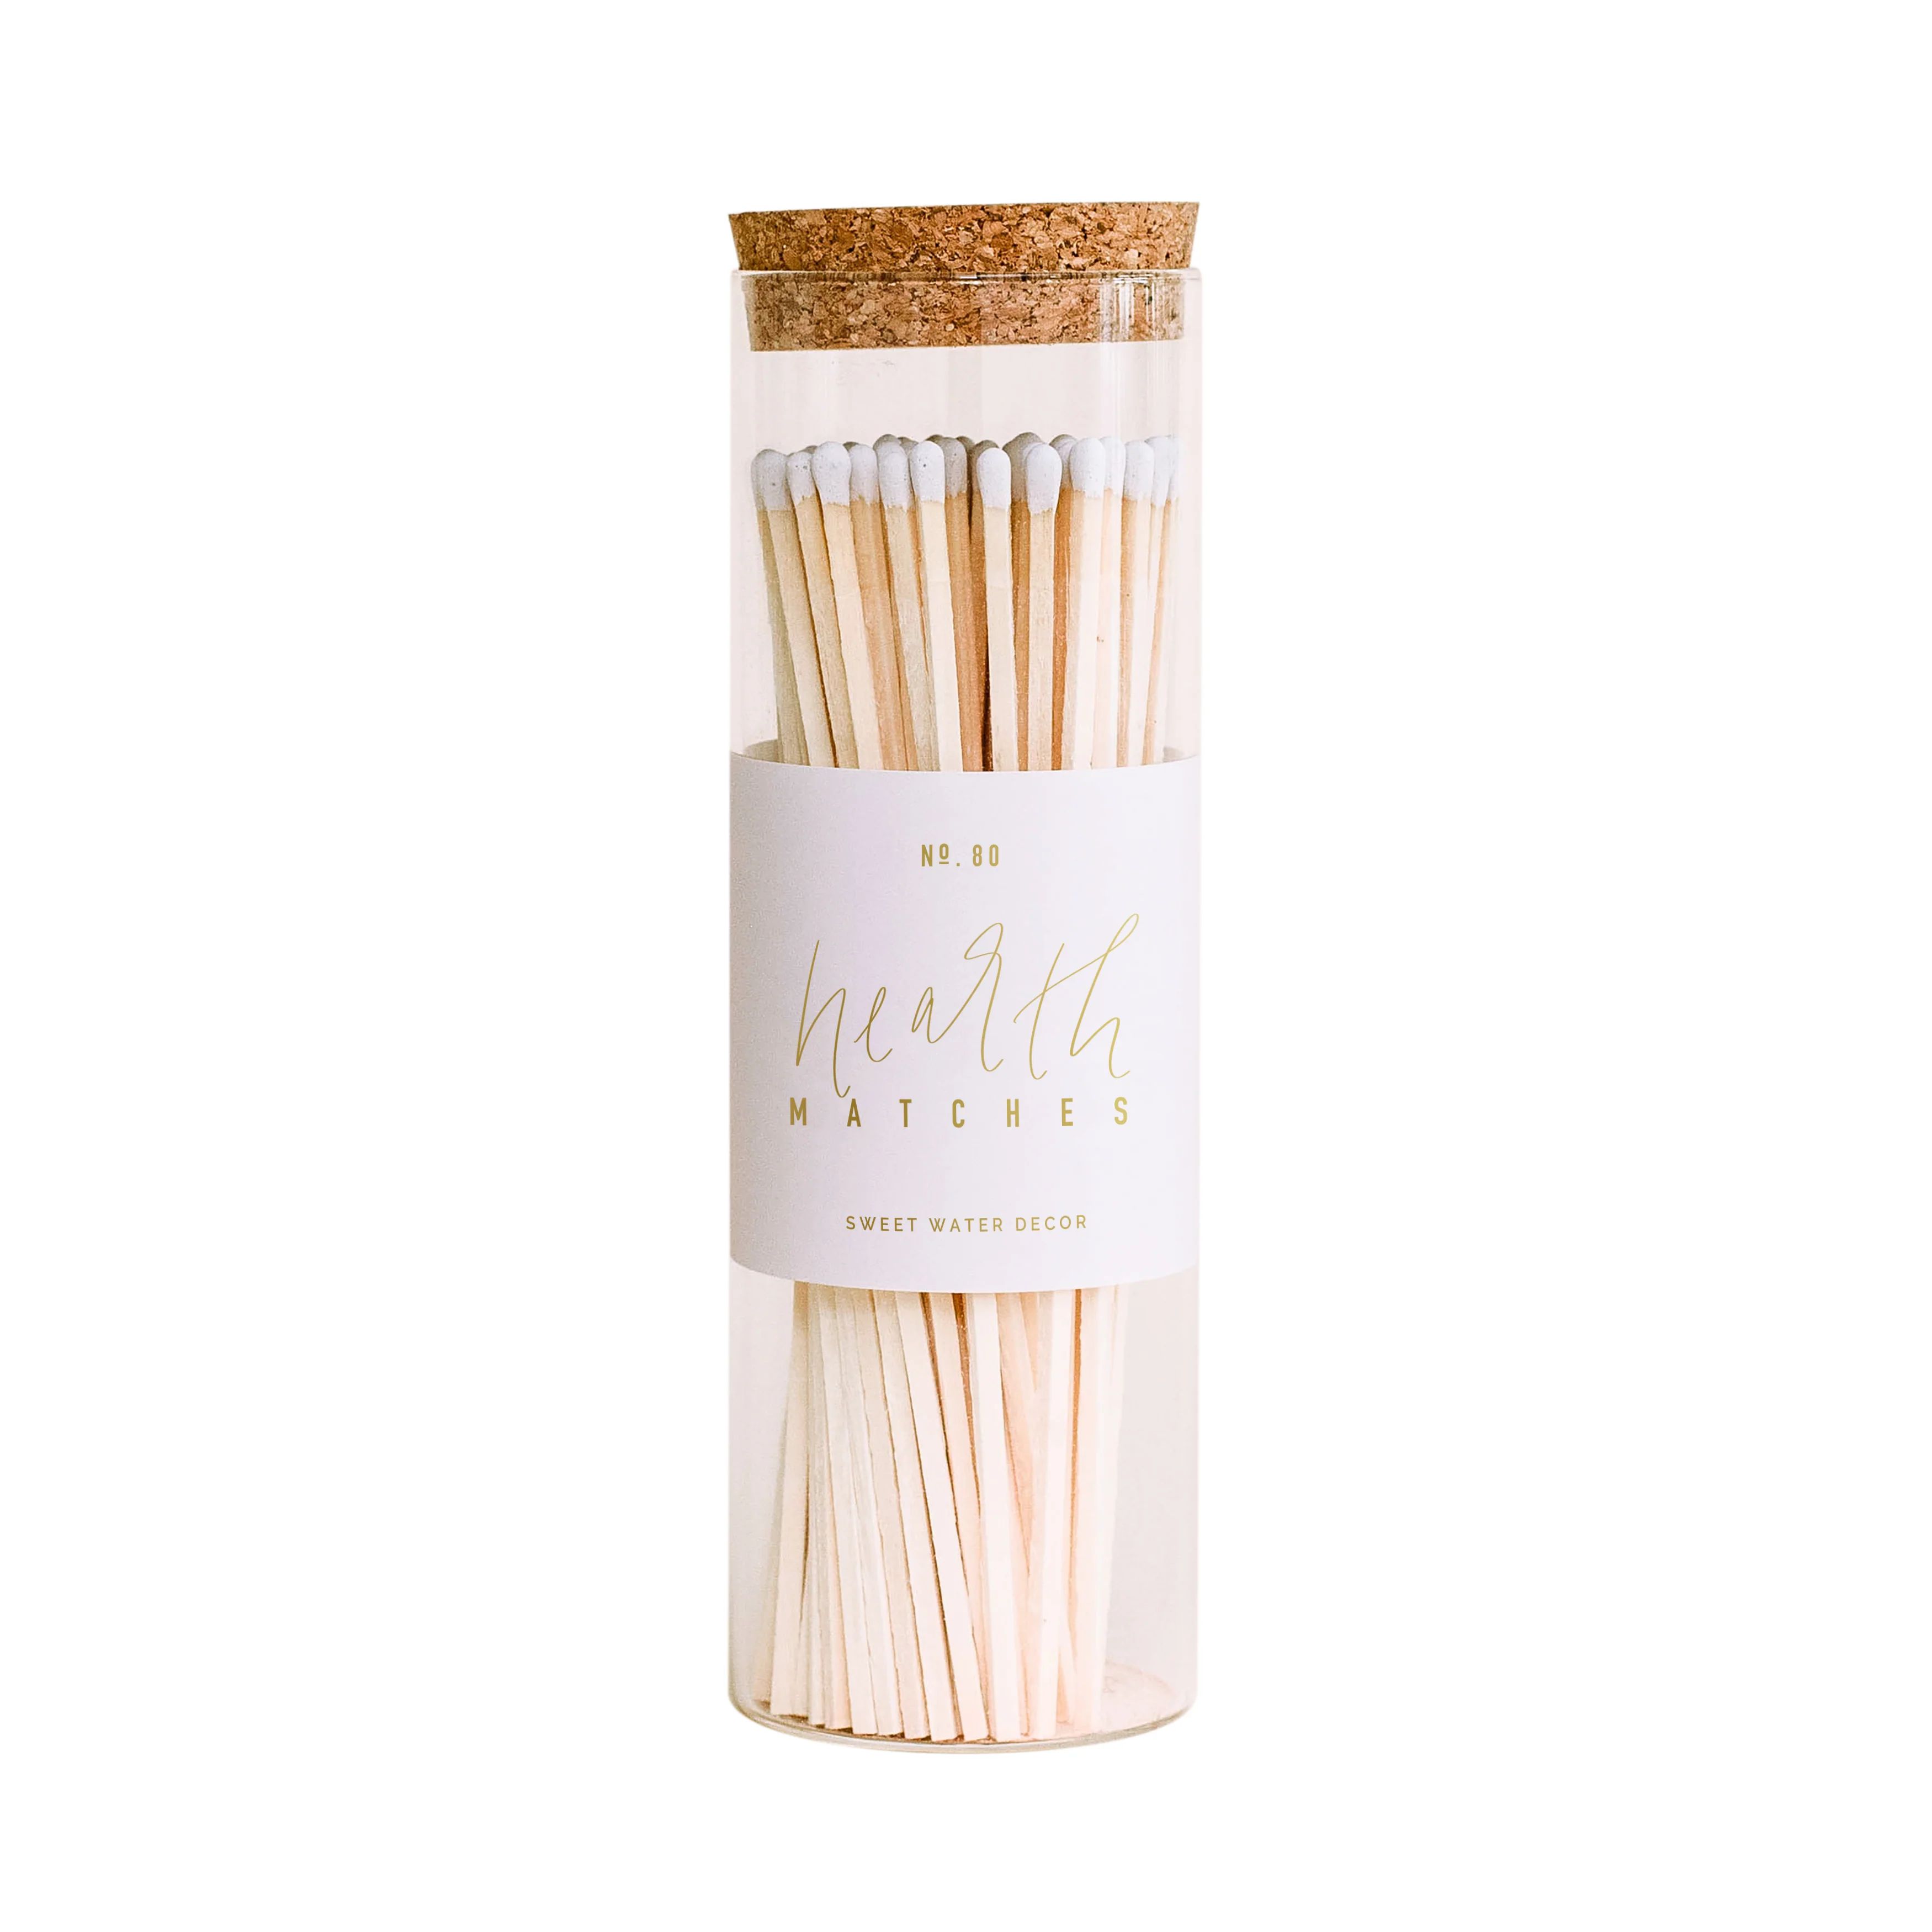 Hearth Matches - White - 80 Count, 7" | Sweet Water Decor, LLC